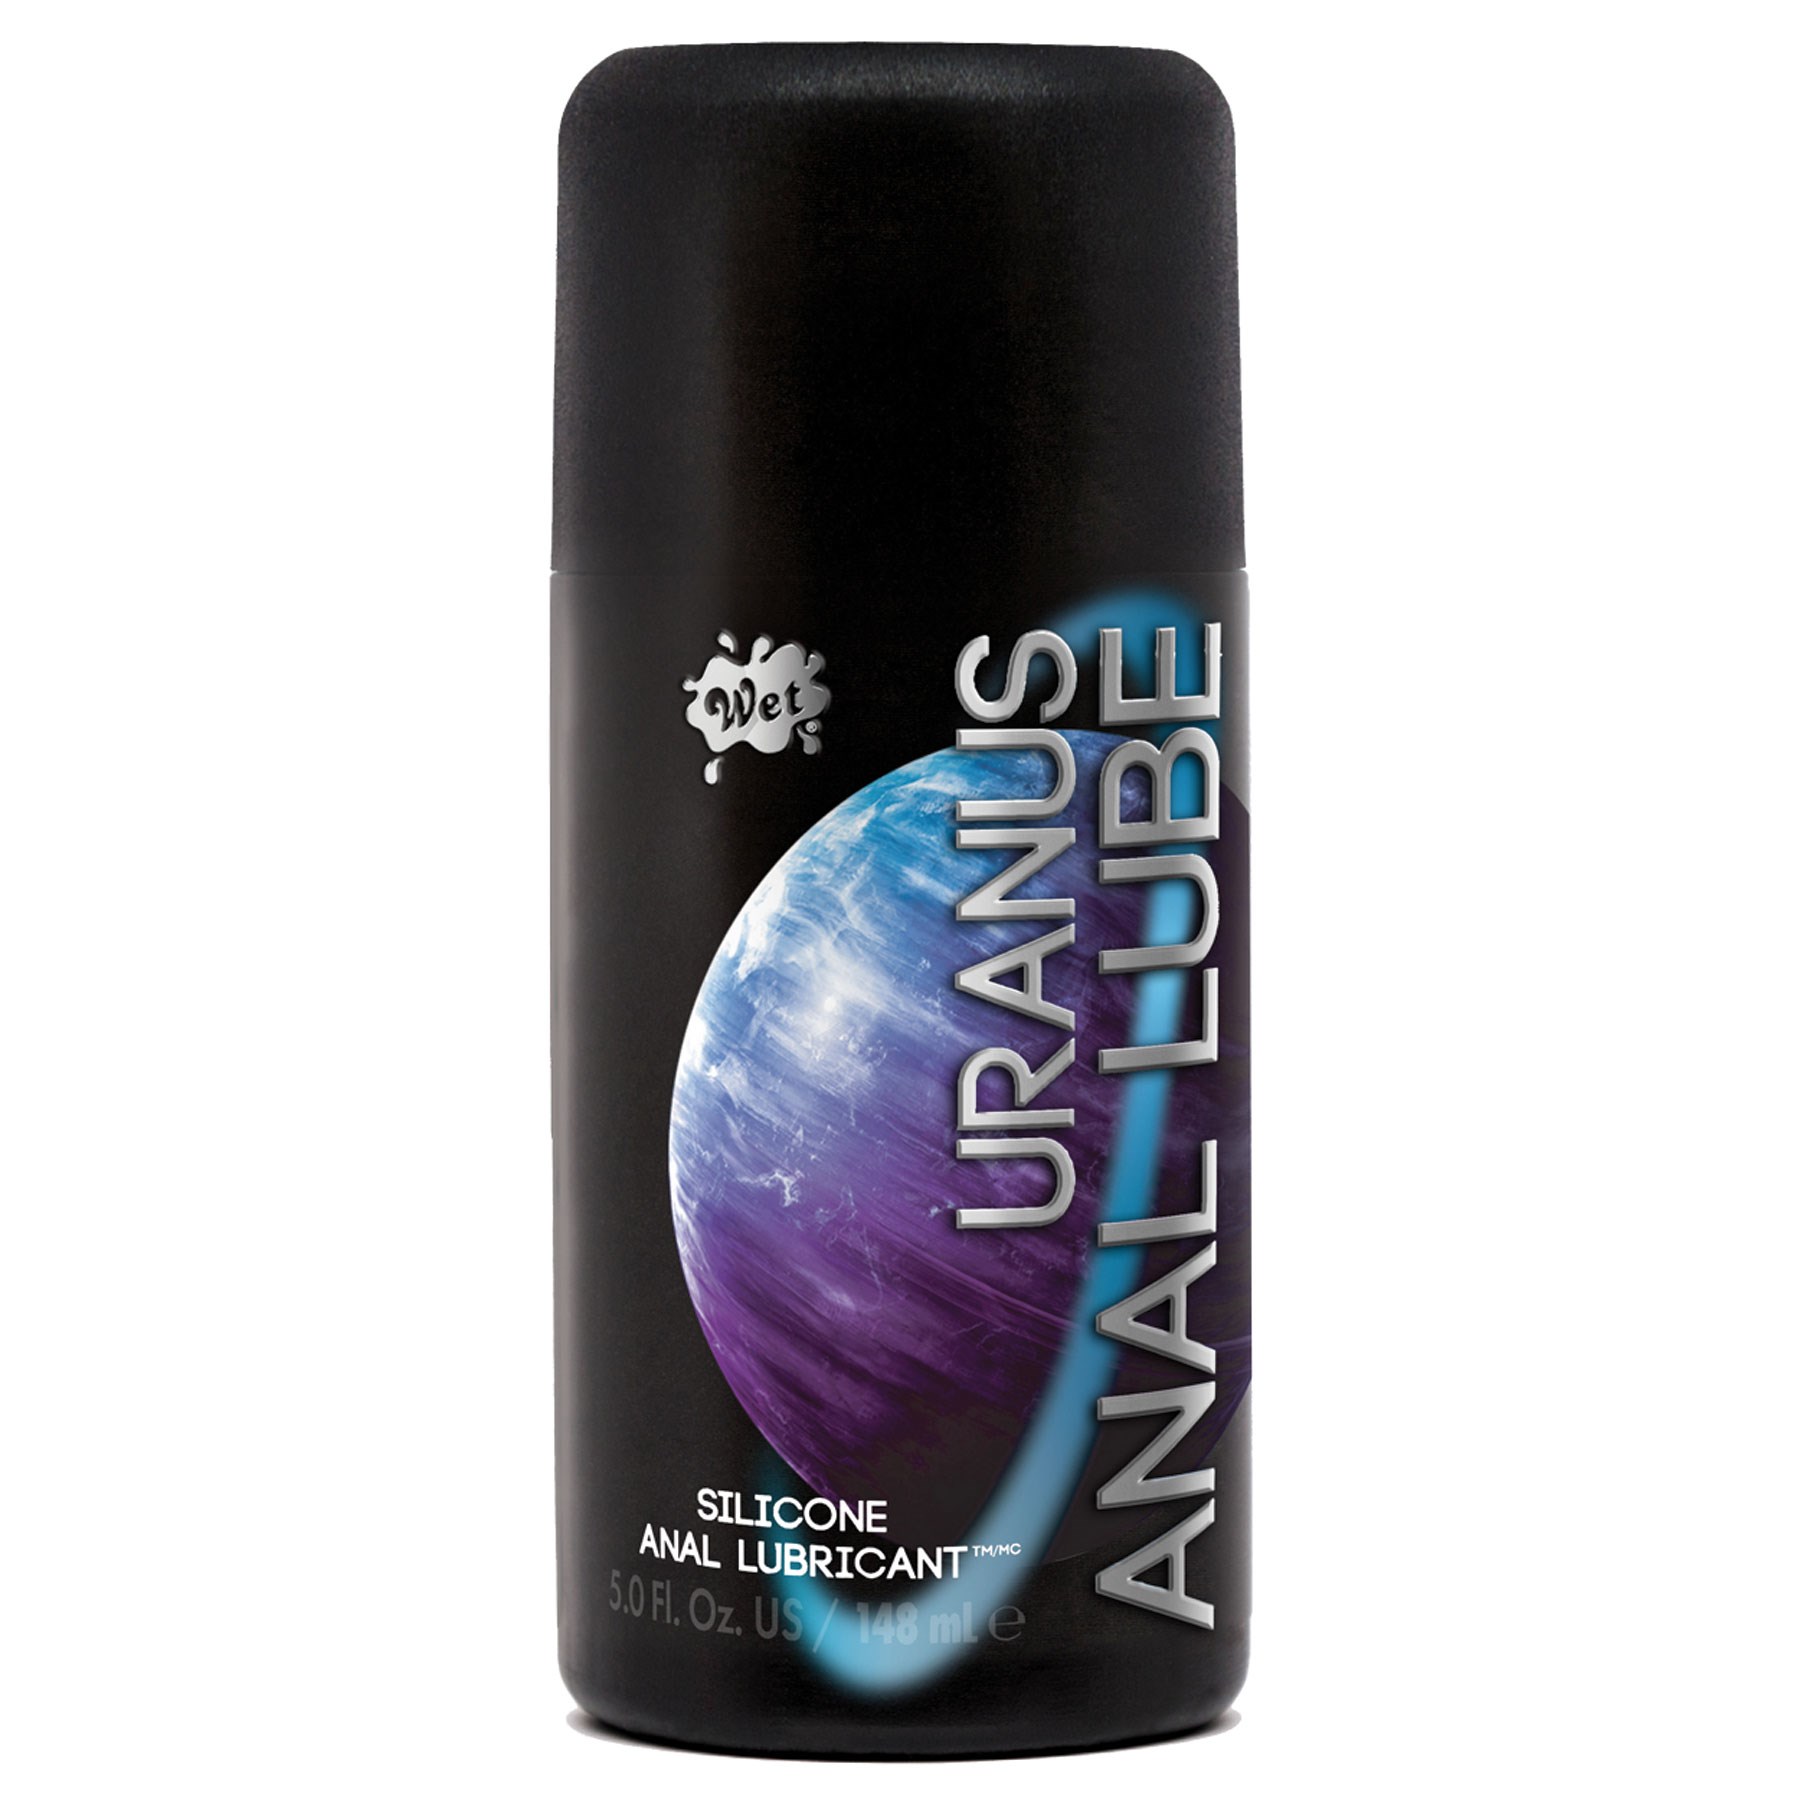 Wet Uranus by Trigg Silicone Anal Lube